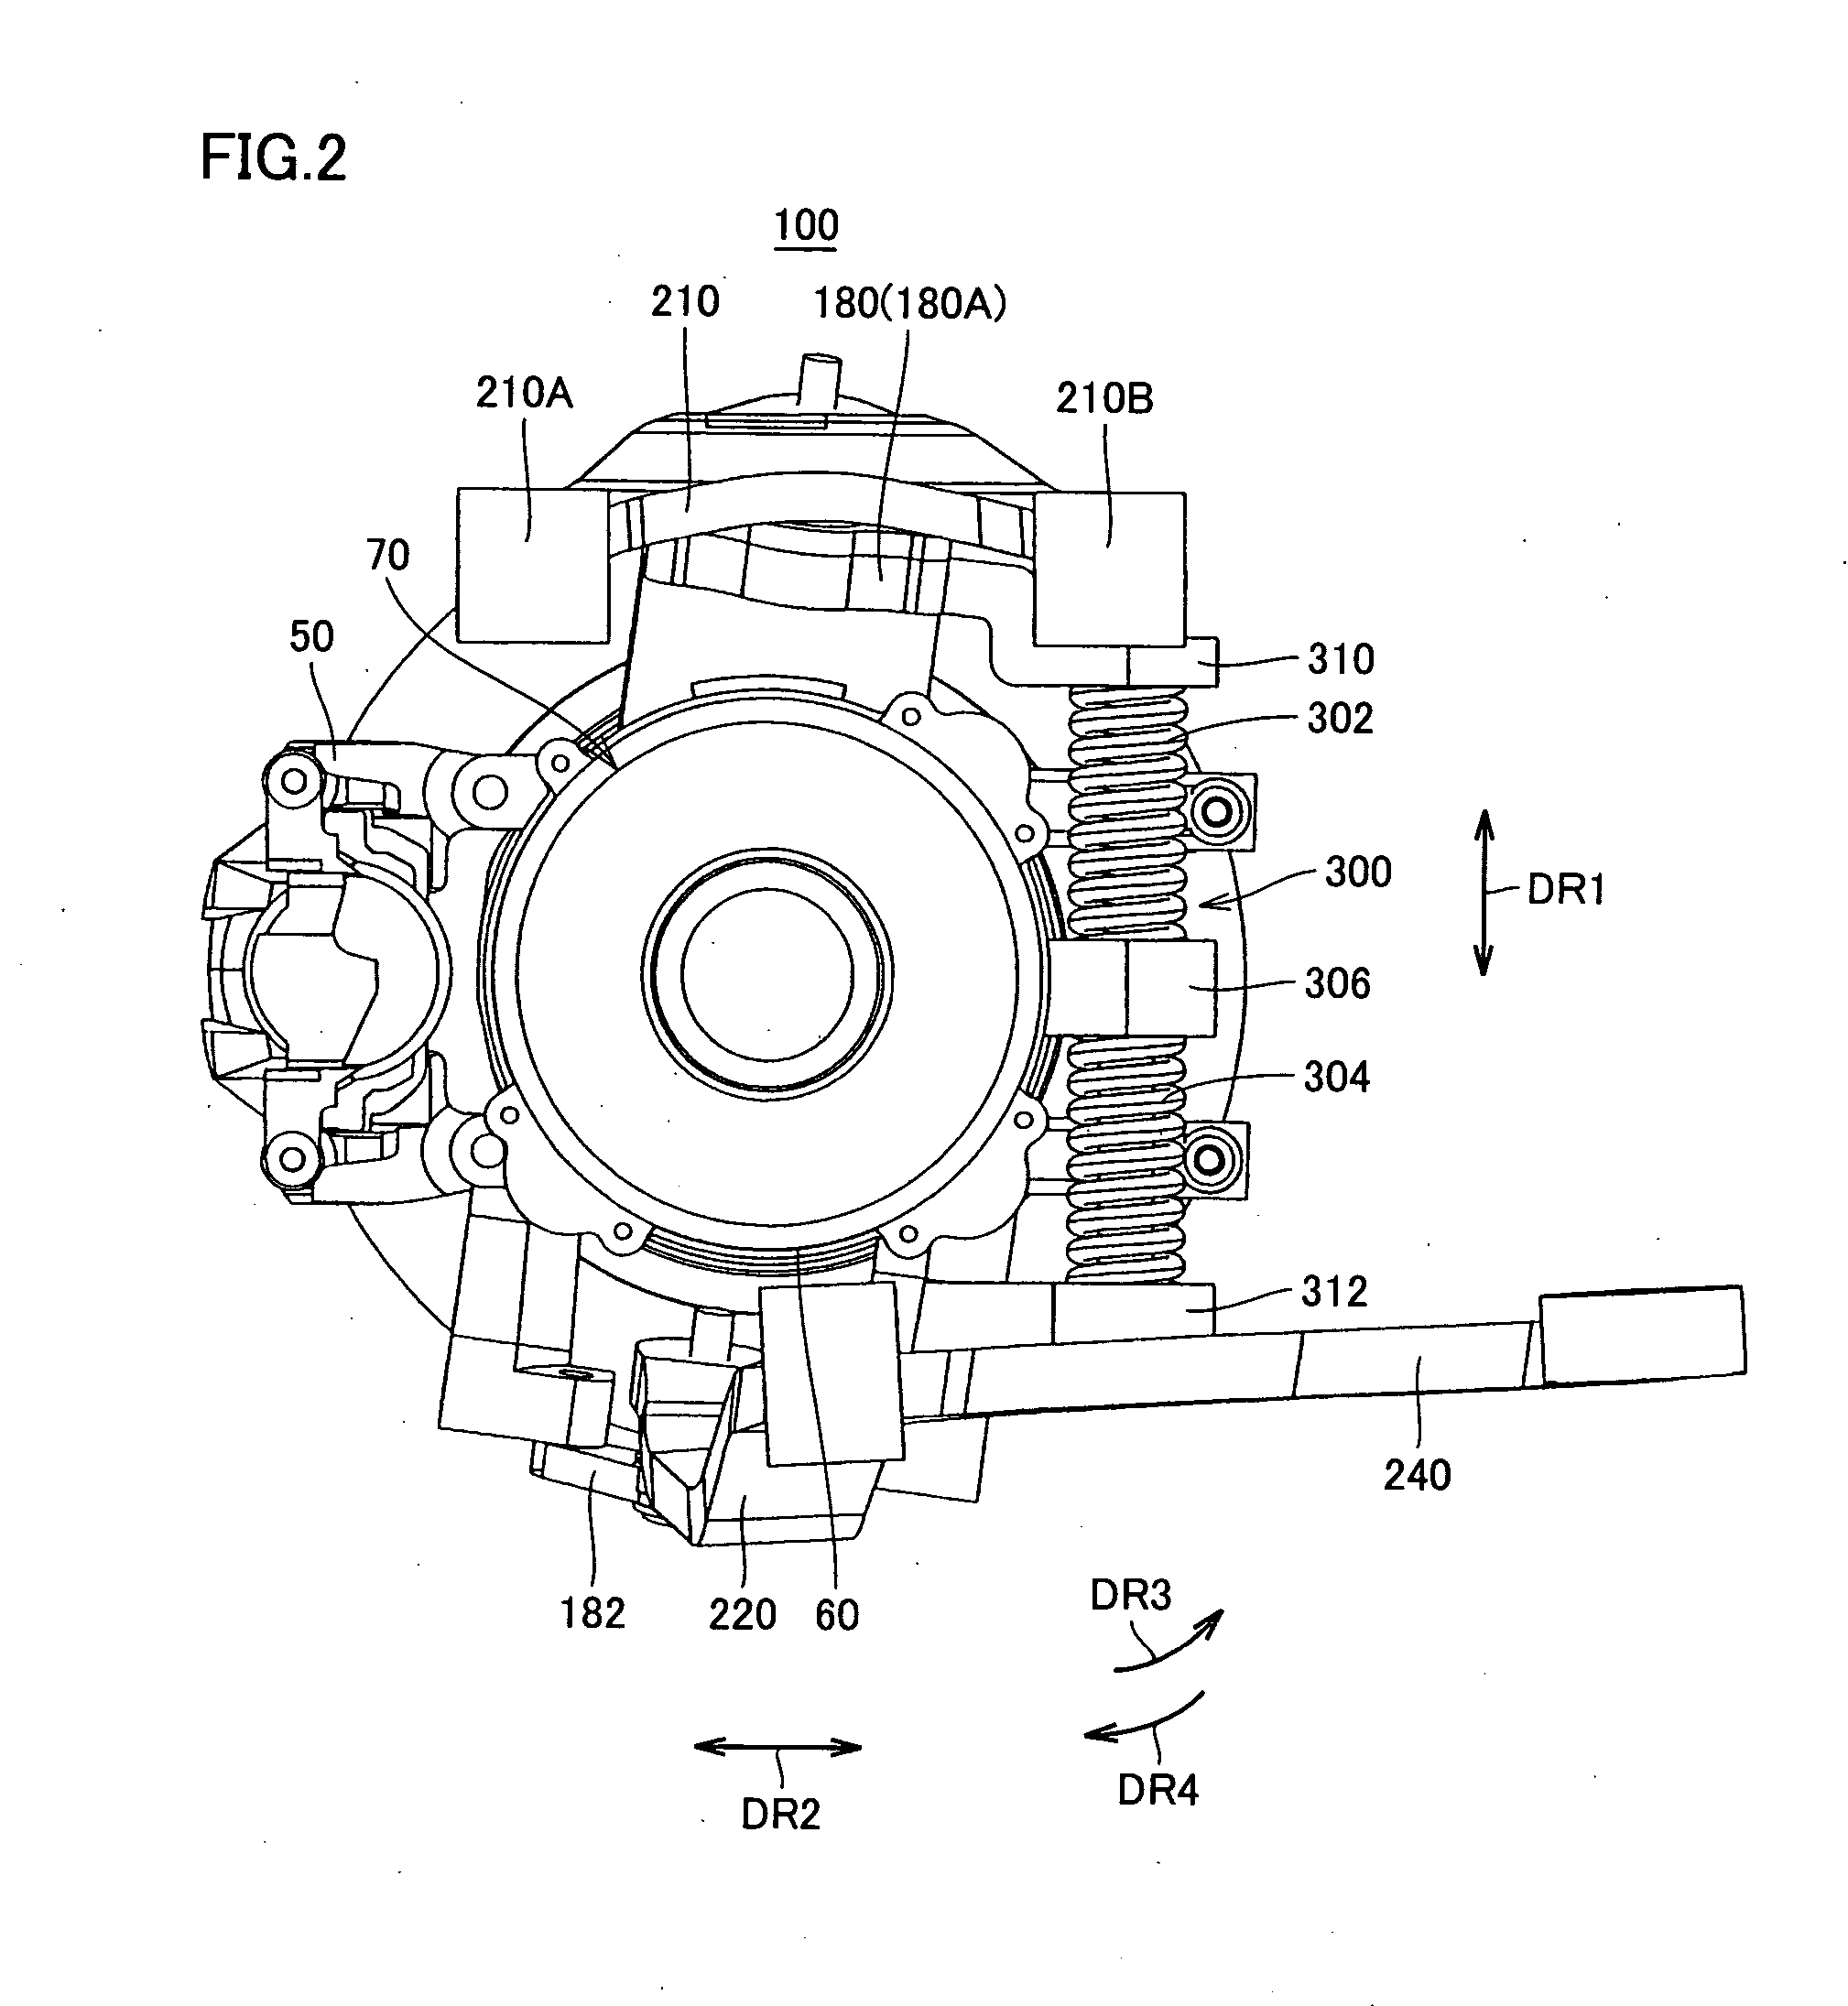 In-Wheel motor with high durability